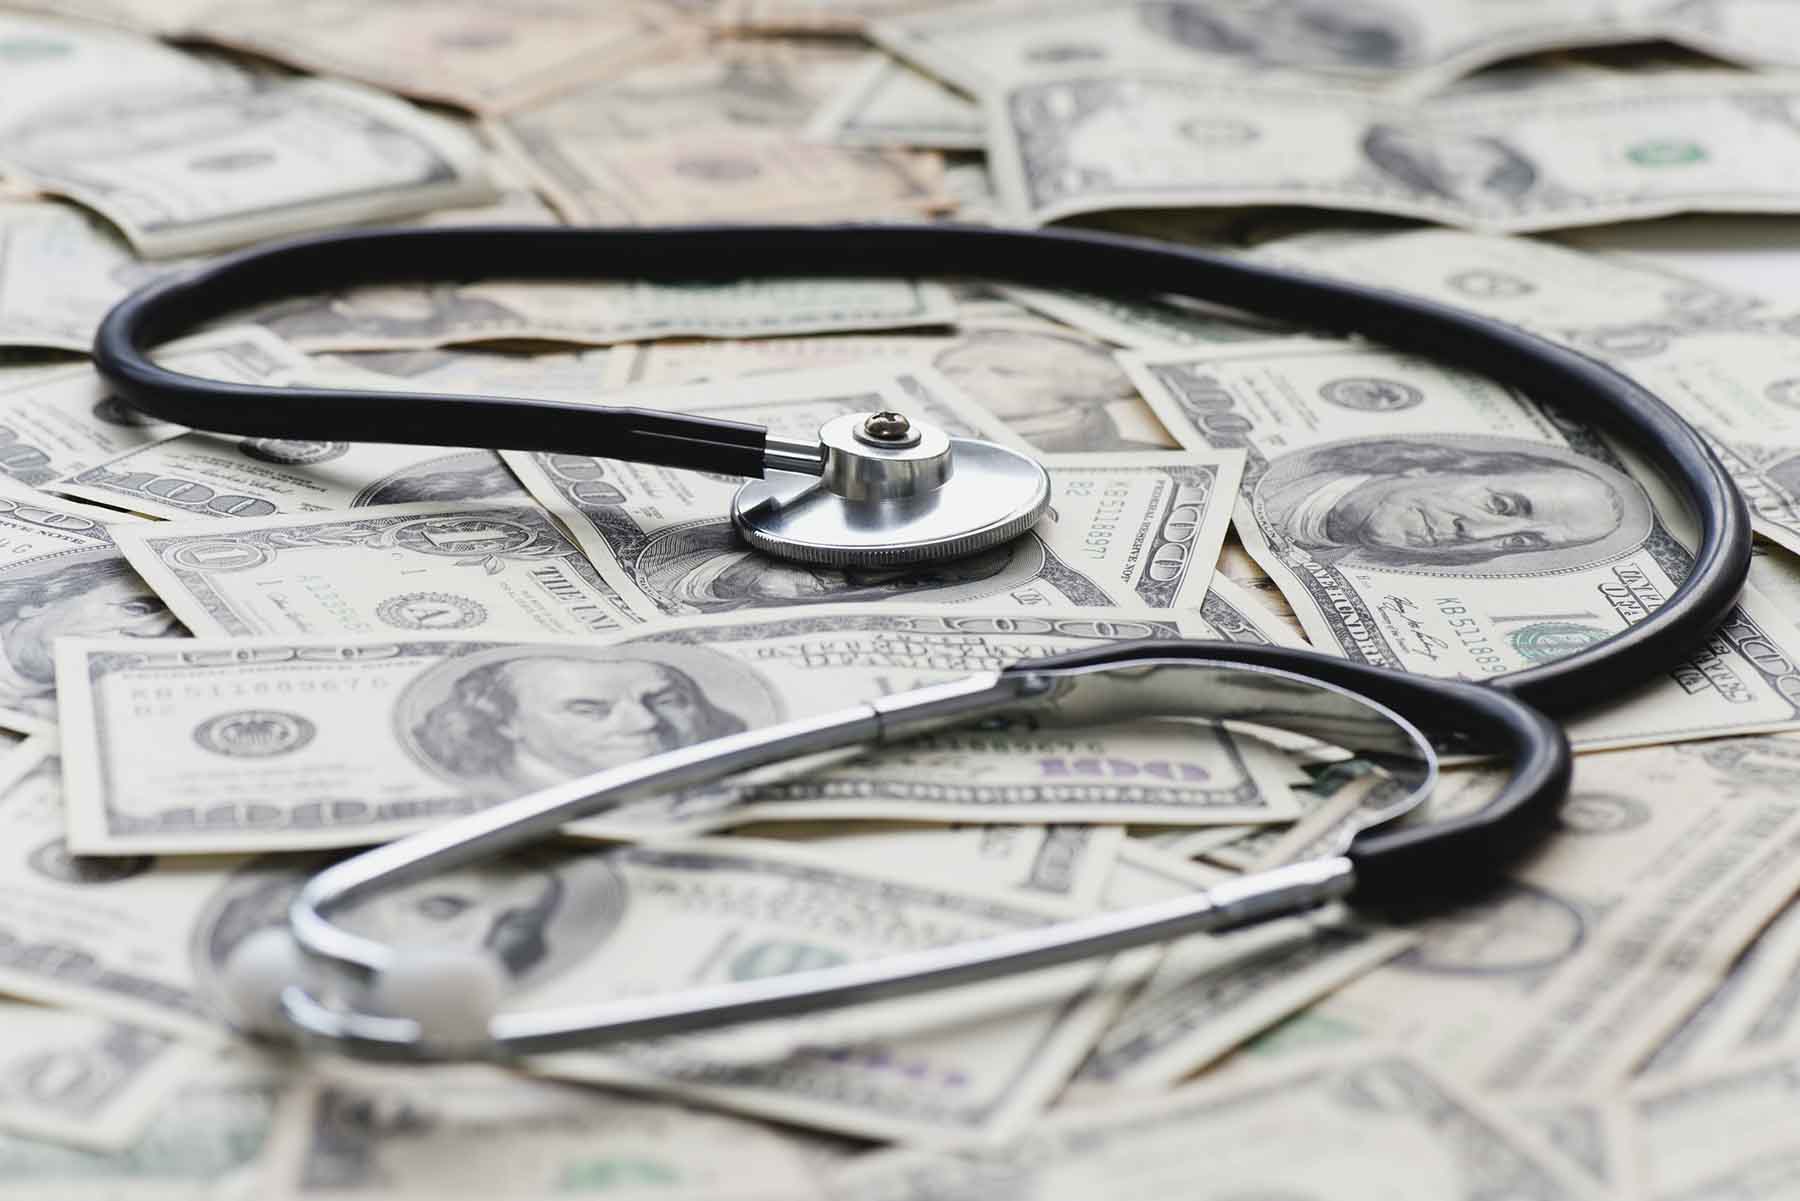 Stethoscope on a pile of US bills